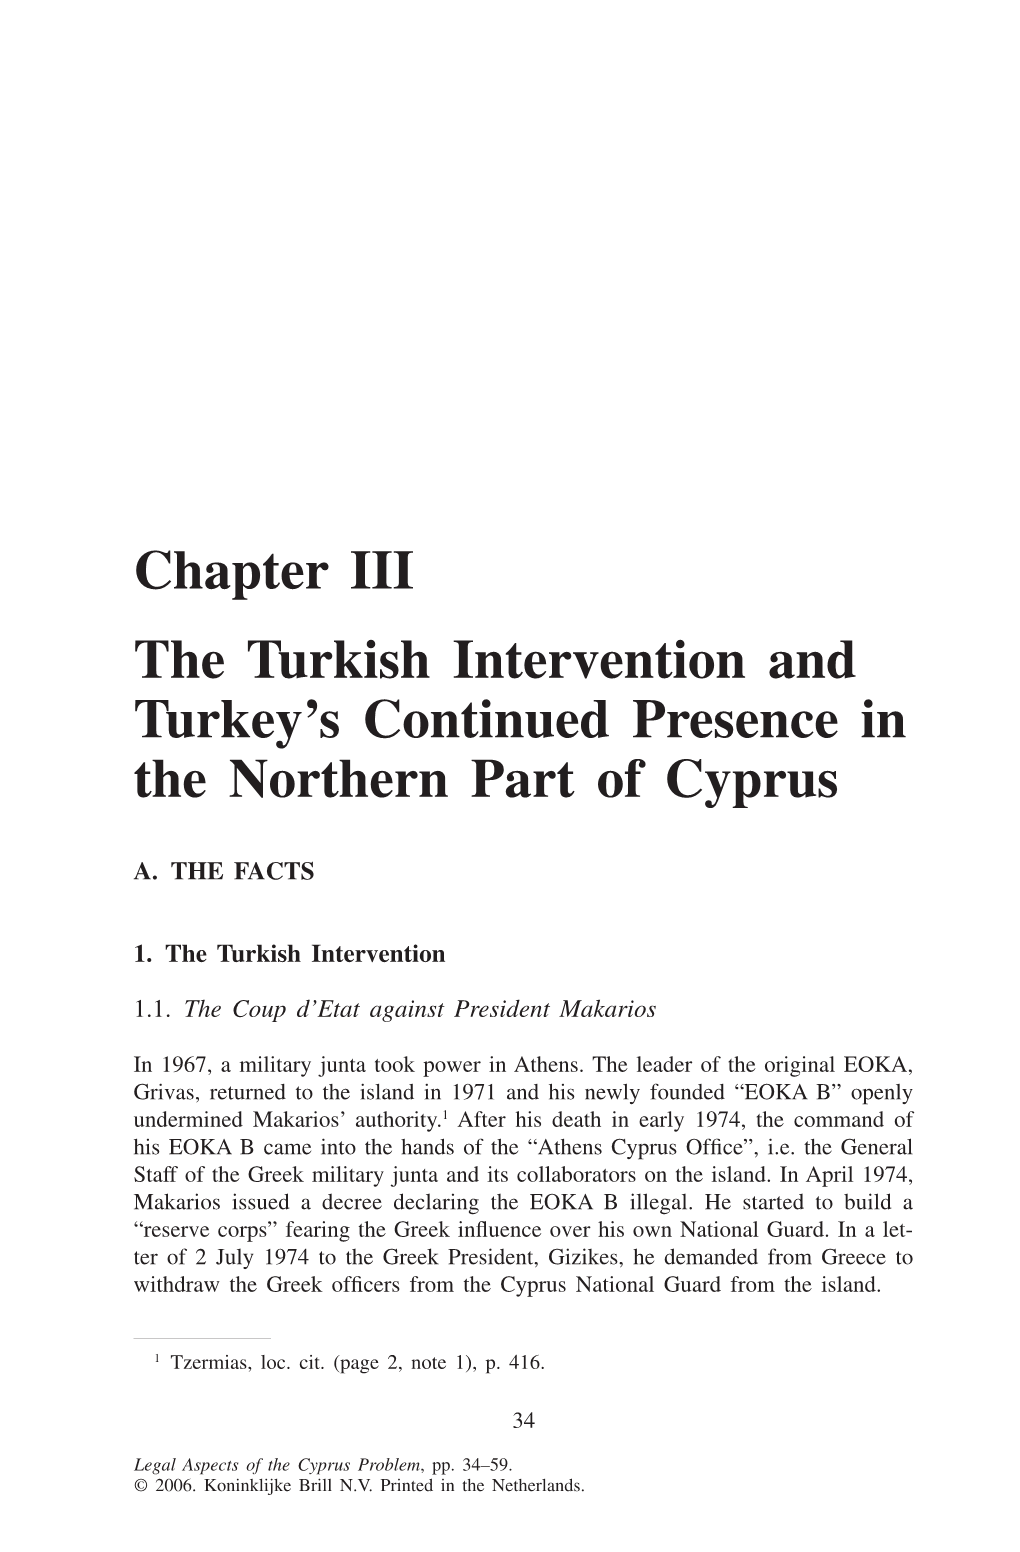 Chapter III the Turkish Intervention and Turkey's Continued Presence